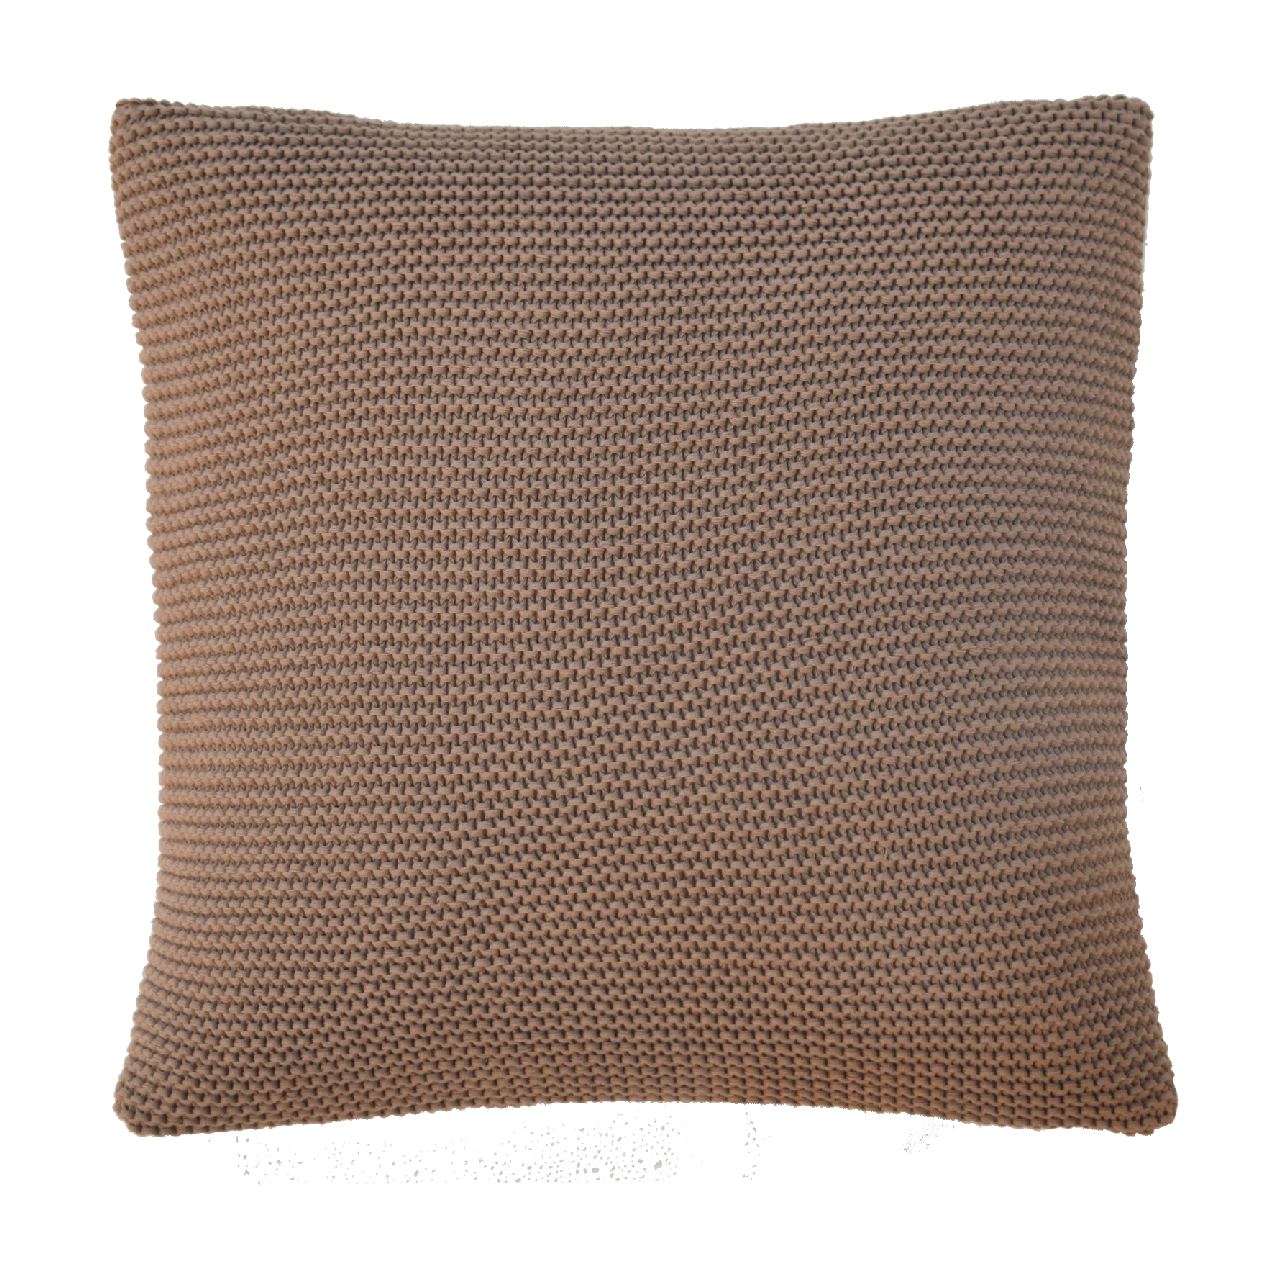 View Brown Cotton Cushion Set of 2 information